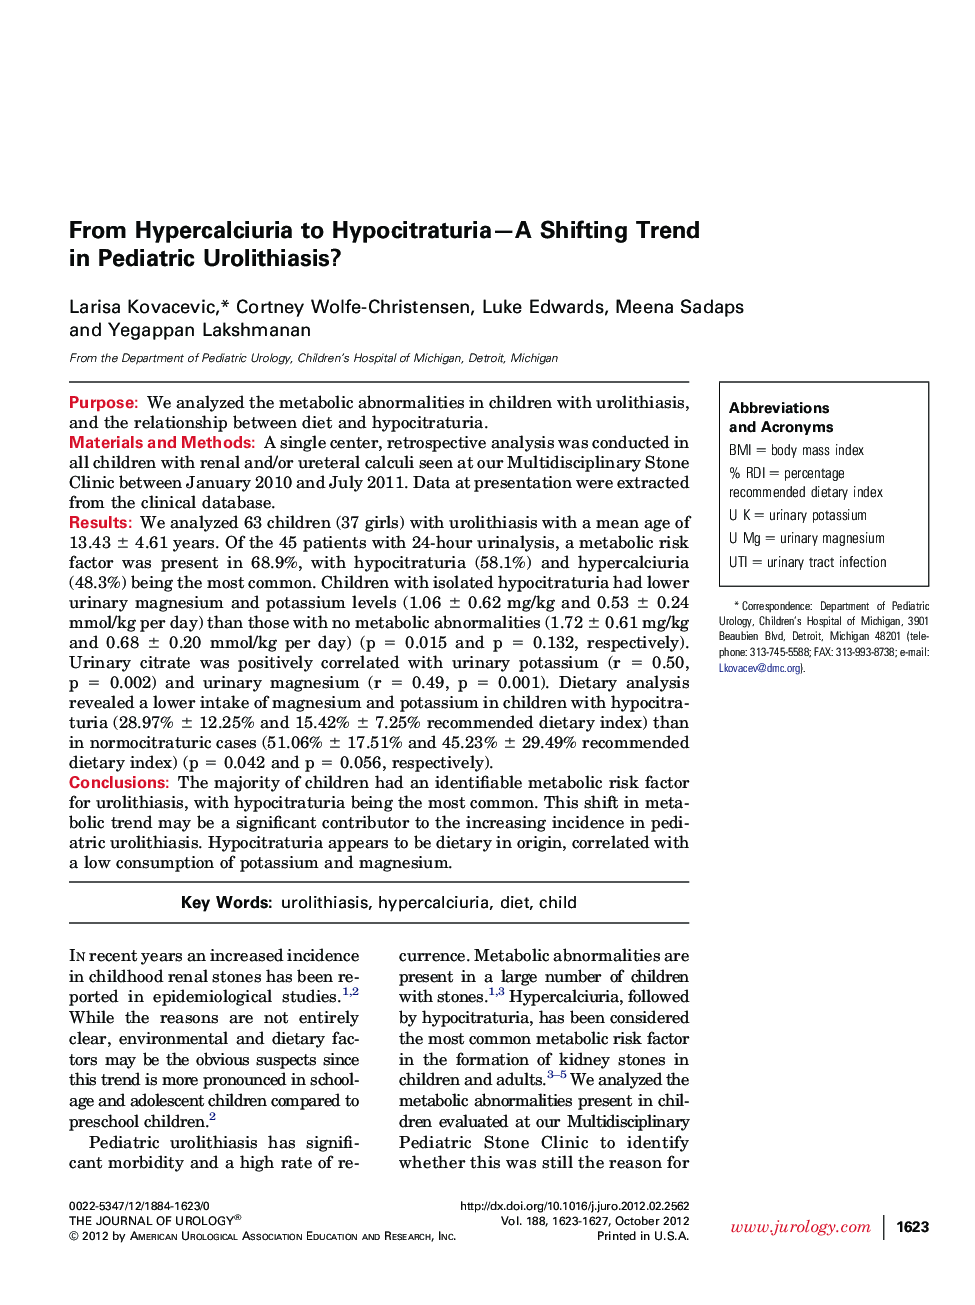 From Hypercalciuria to Hypocitraturia—A Shifting Trend in Pediatric Urolithiasis?